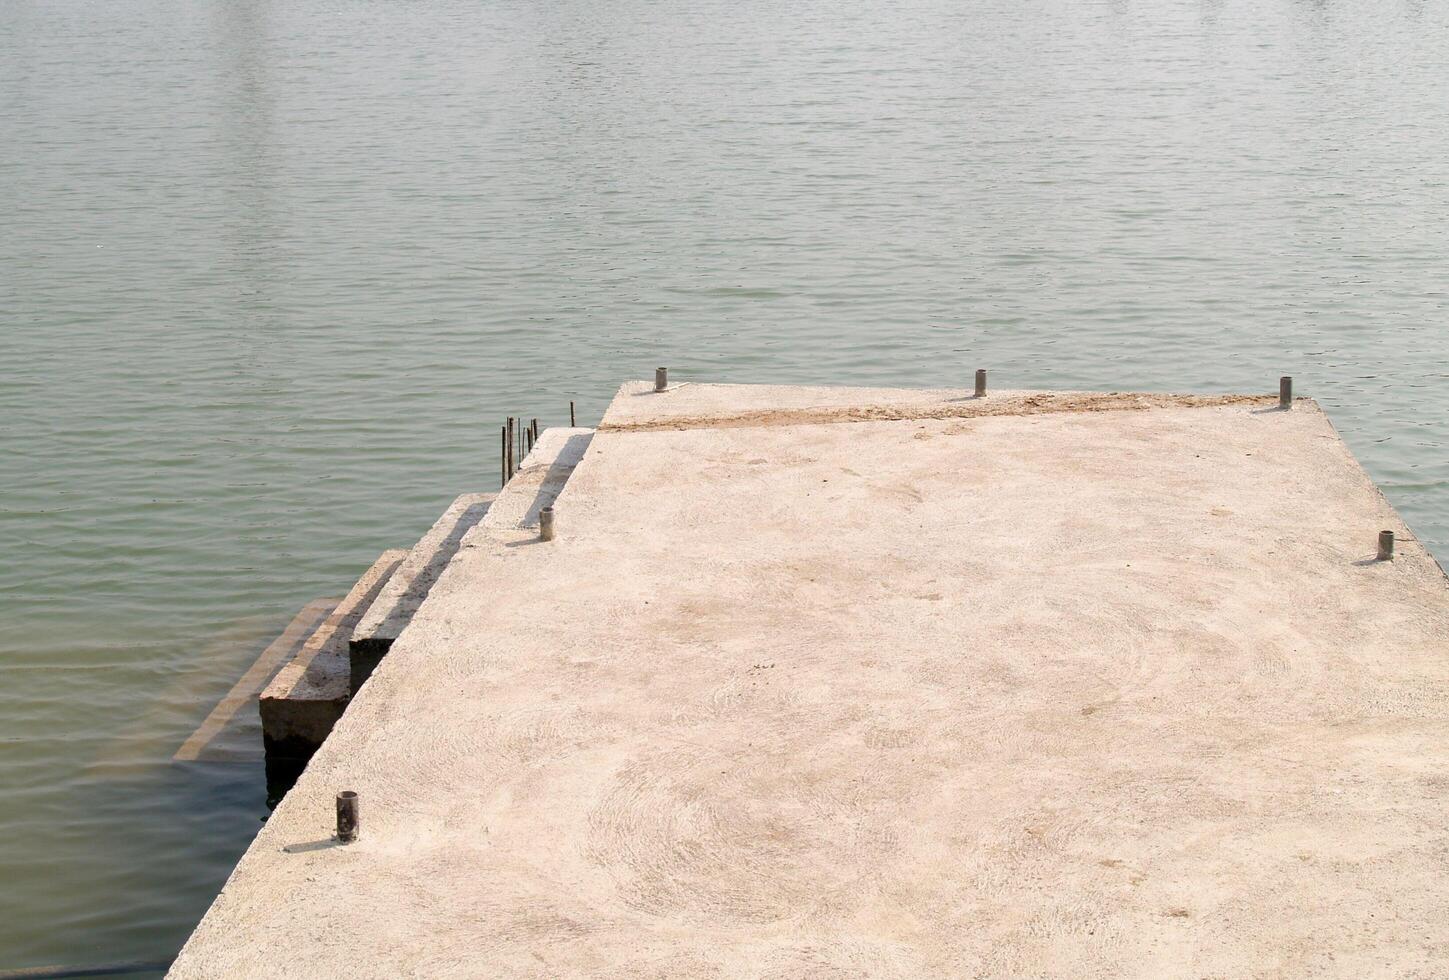 The waterfront is made of concrete and there is a path that can walk down into the pool photo